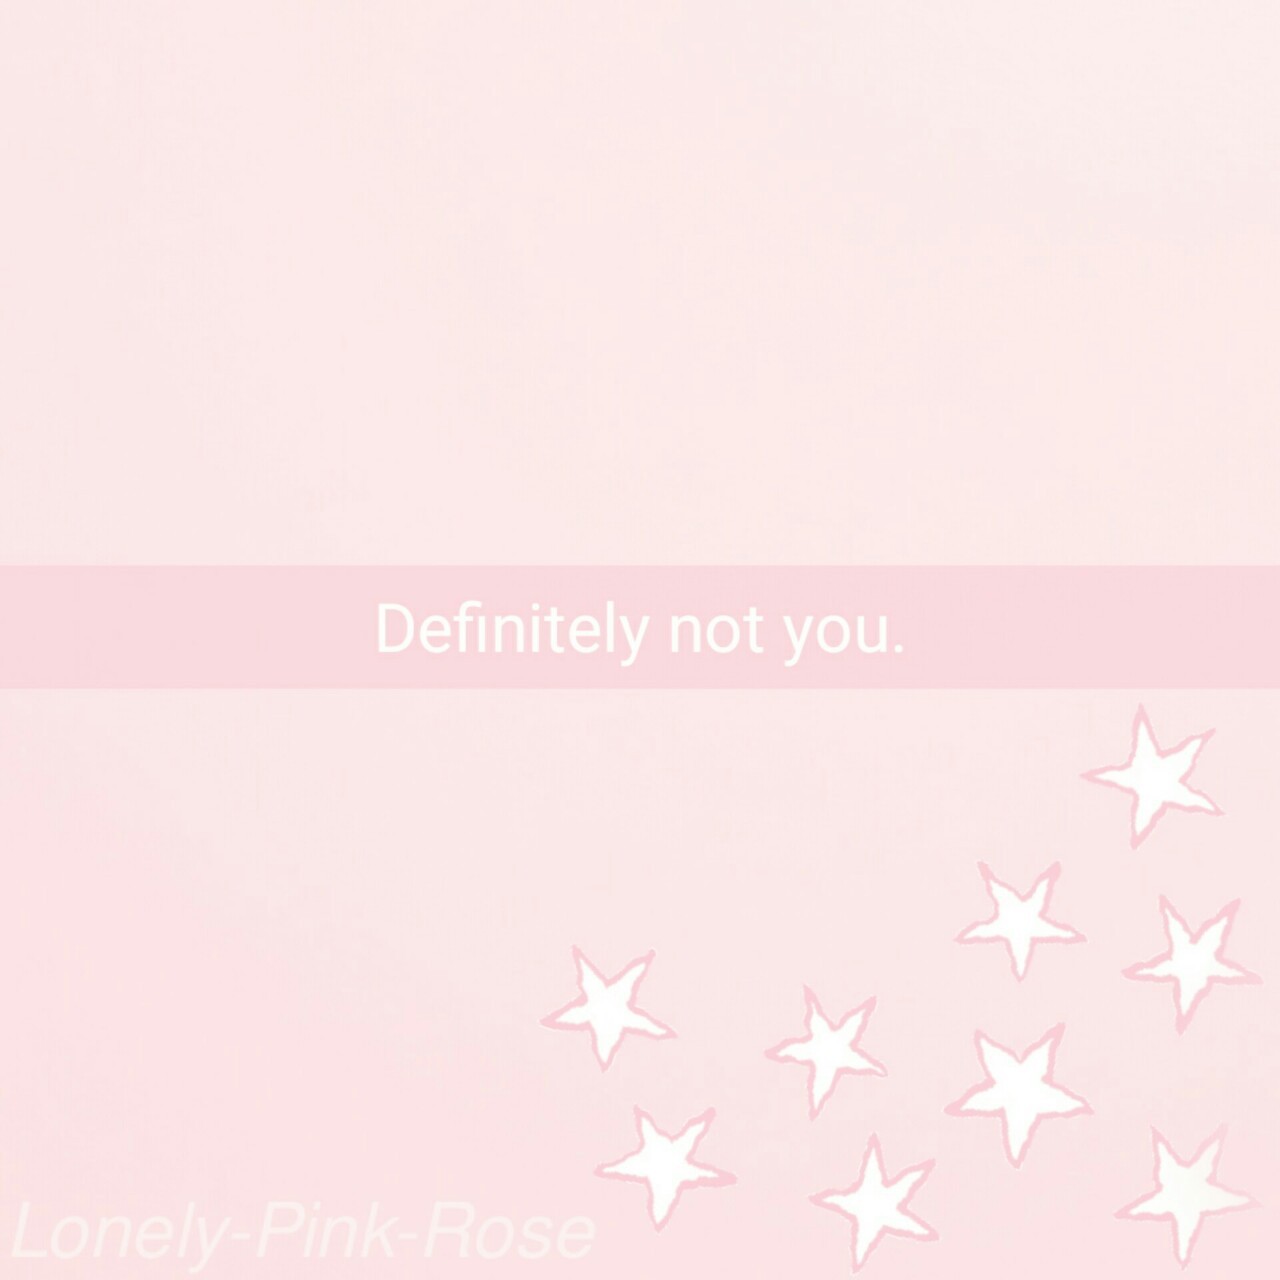 lonely-pink-rose:  lonely-pink-rose : my photo ; my edit. (Don’t remove my caption.)